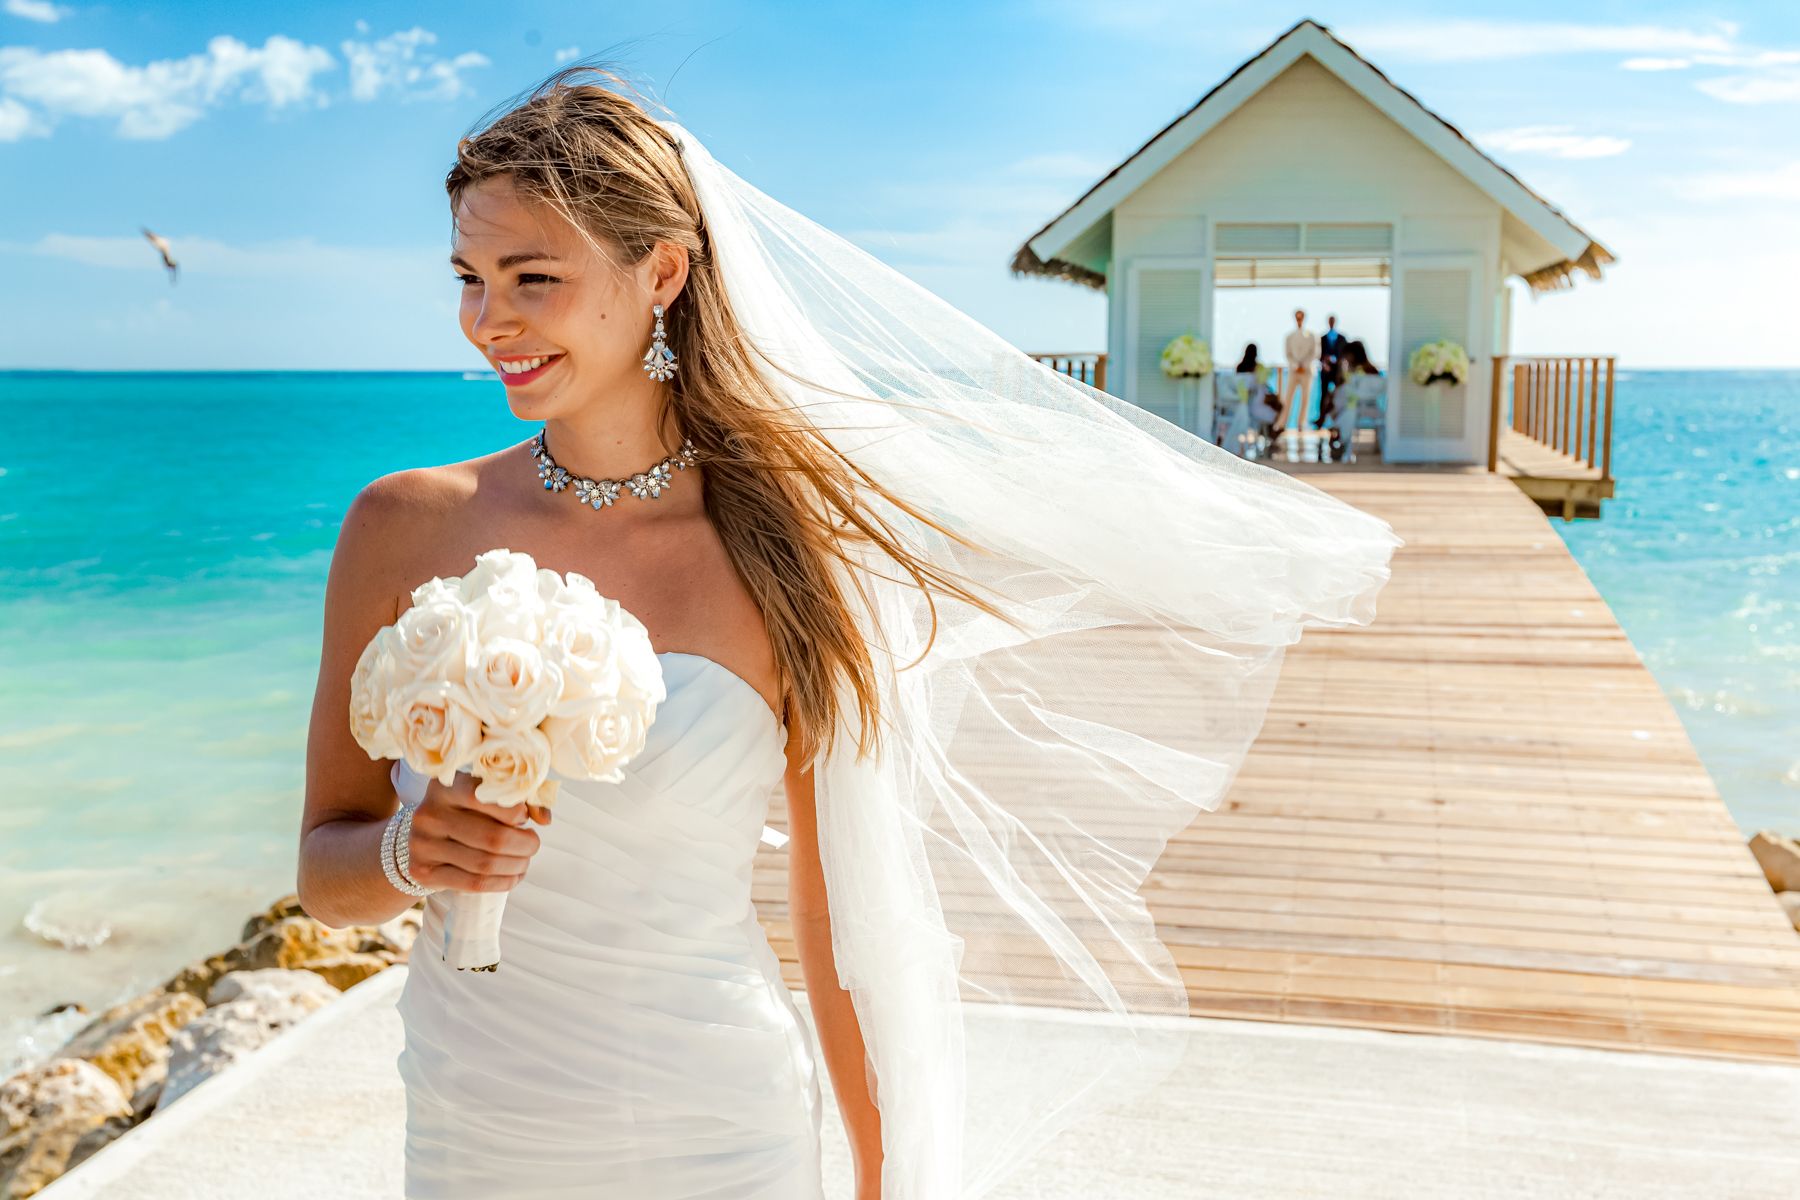 Sandals Over-The-Water Wedding Chapels: A Once In A Lifetime Experience